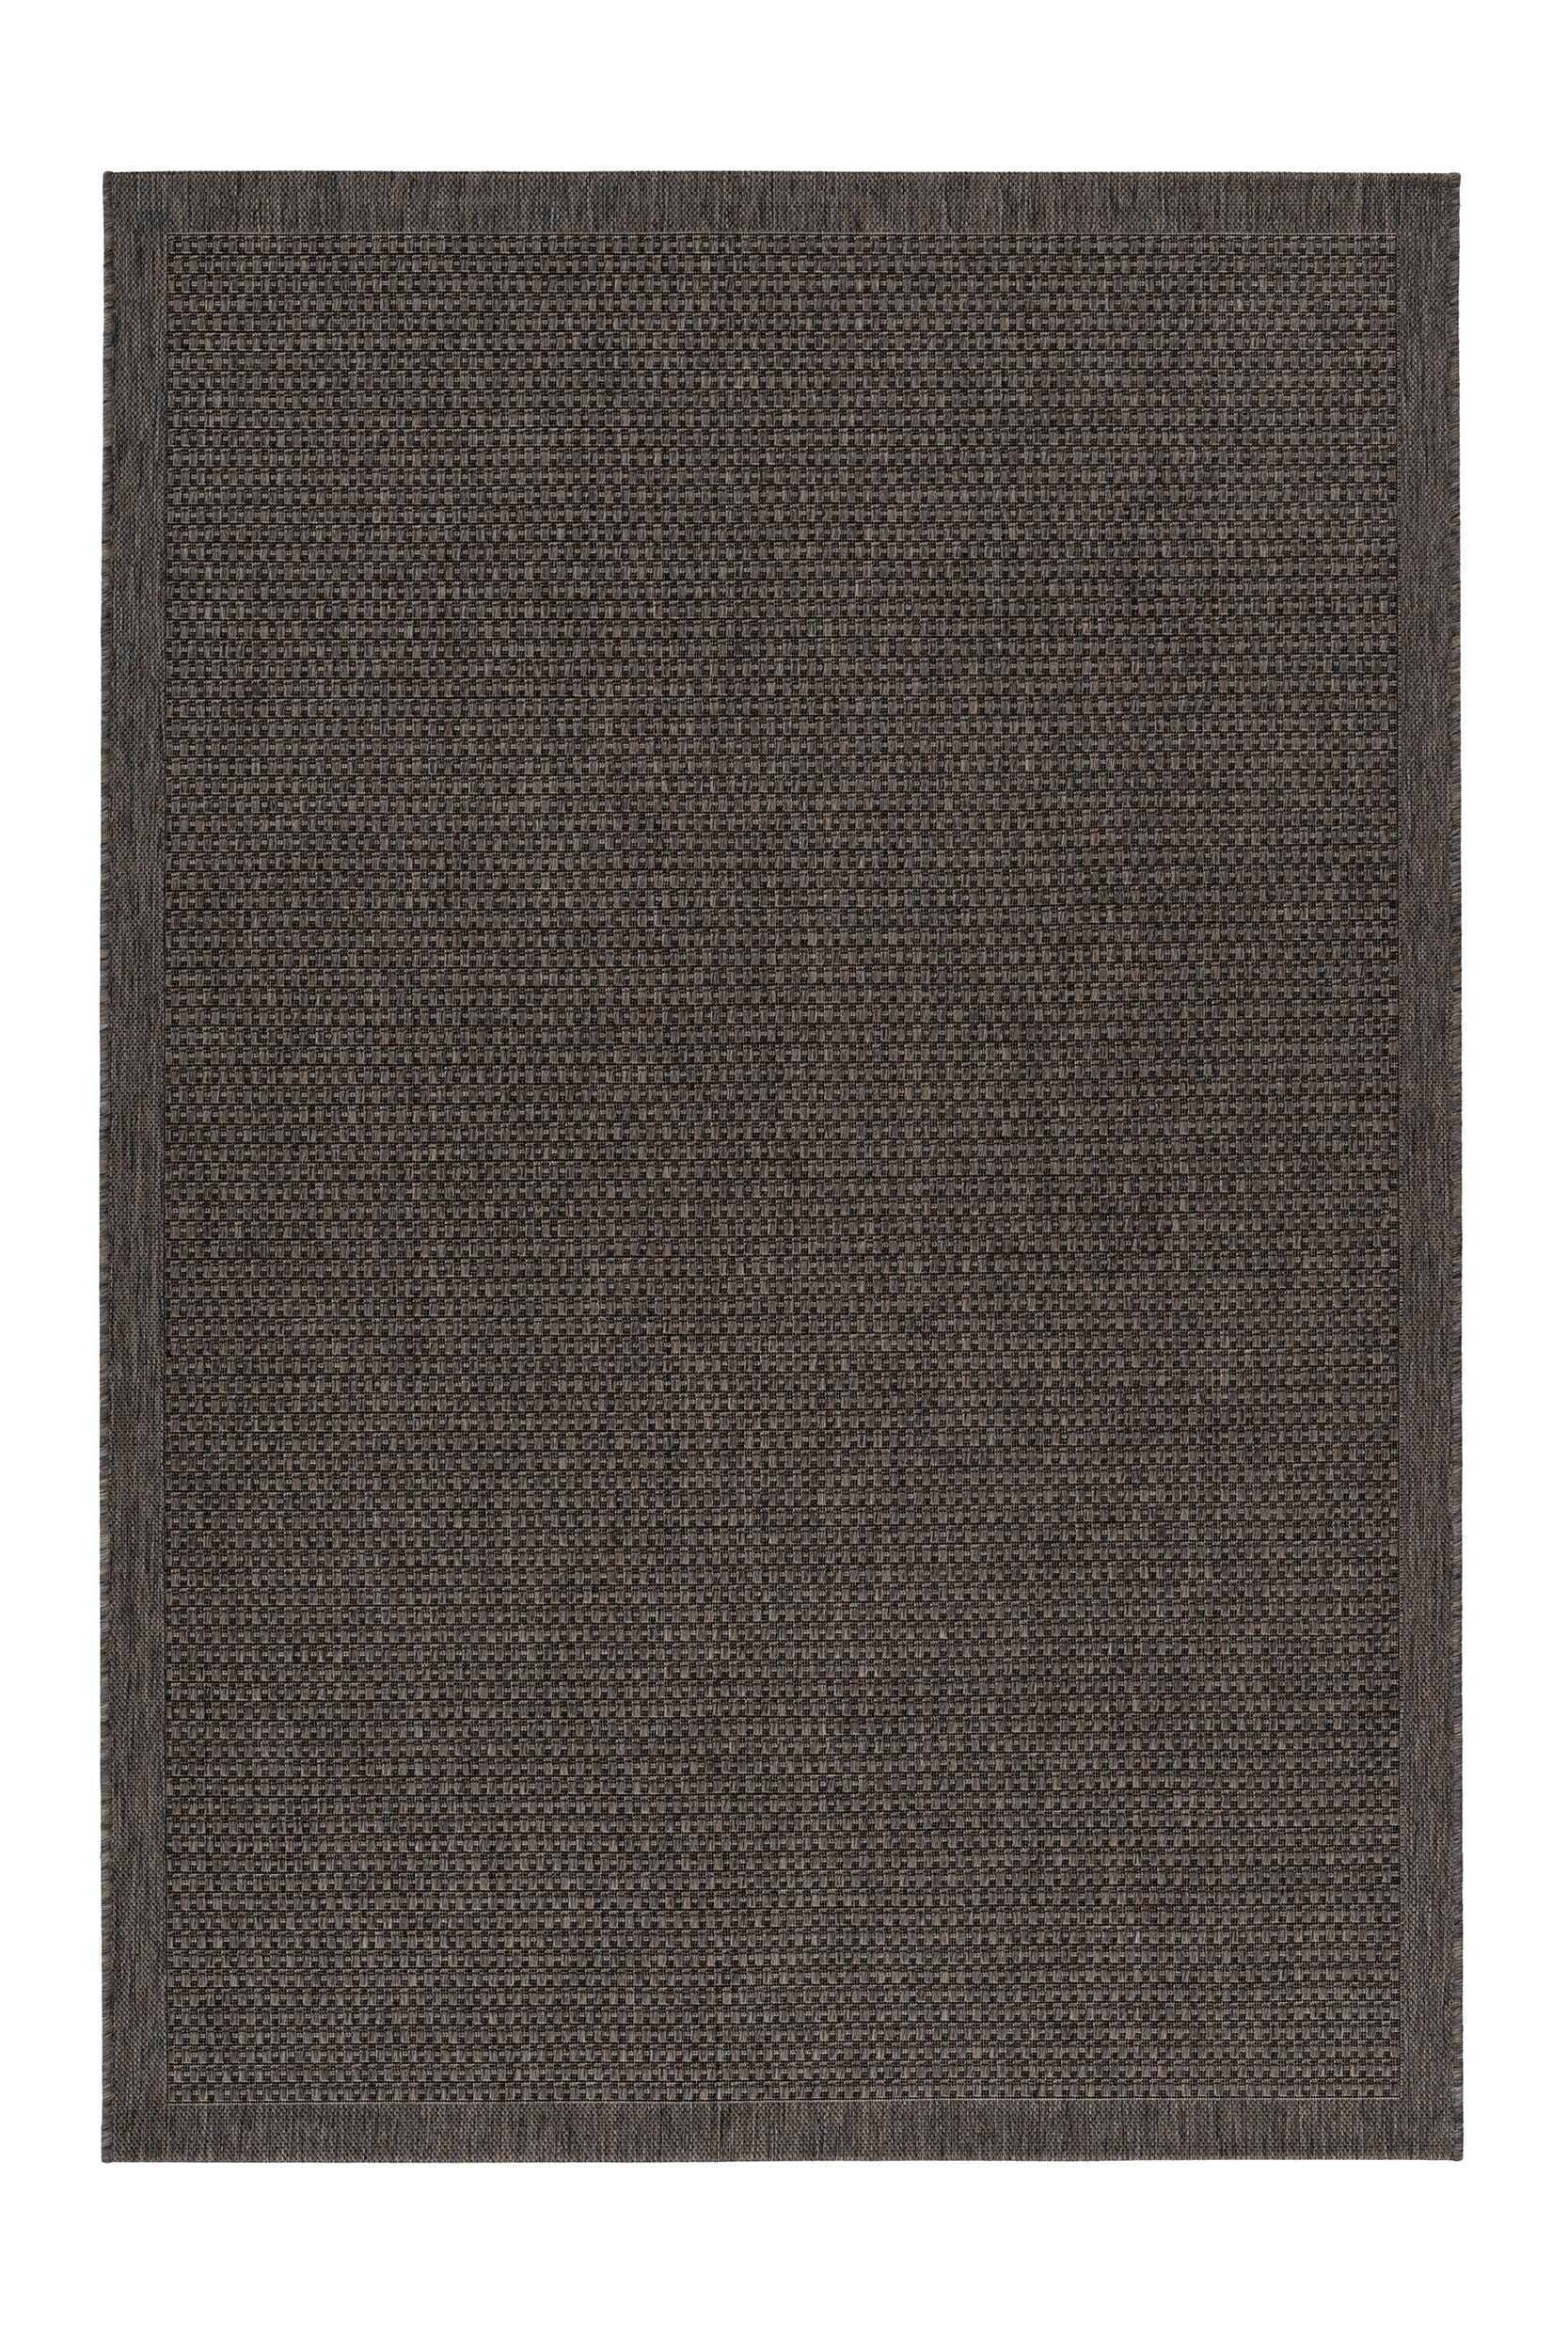 Outdoor Teppich"Sunside" taupe, 200x290cm